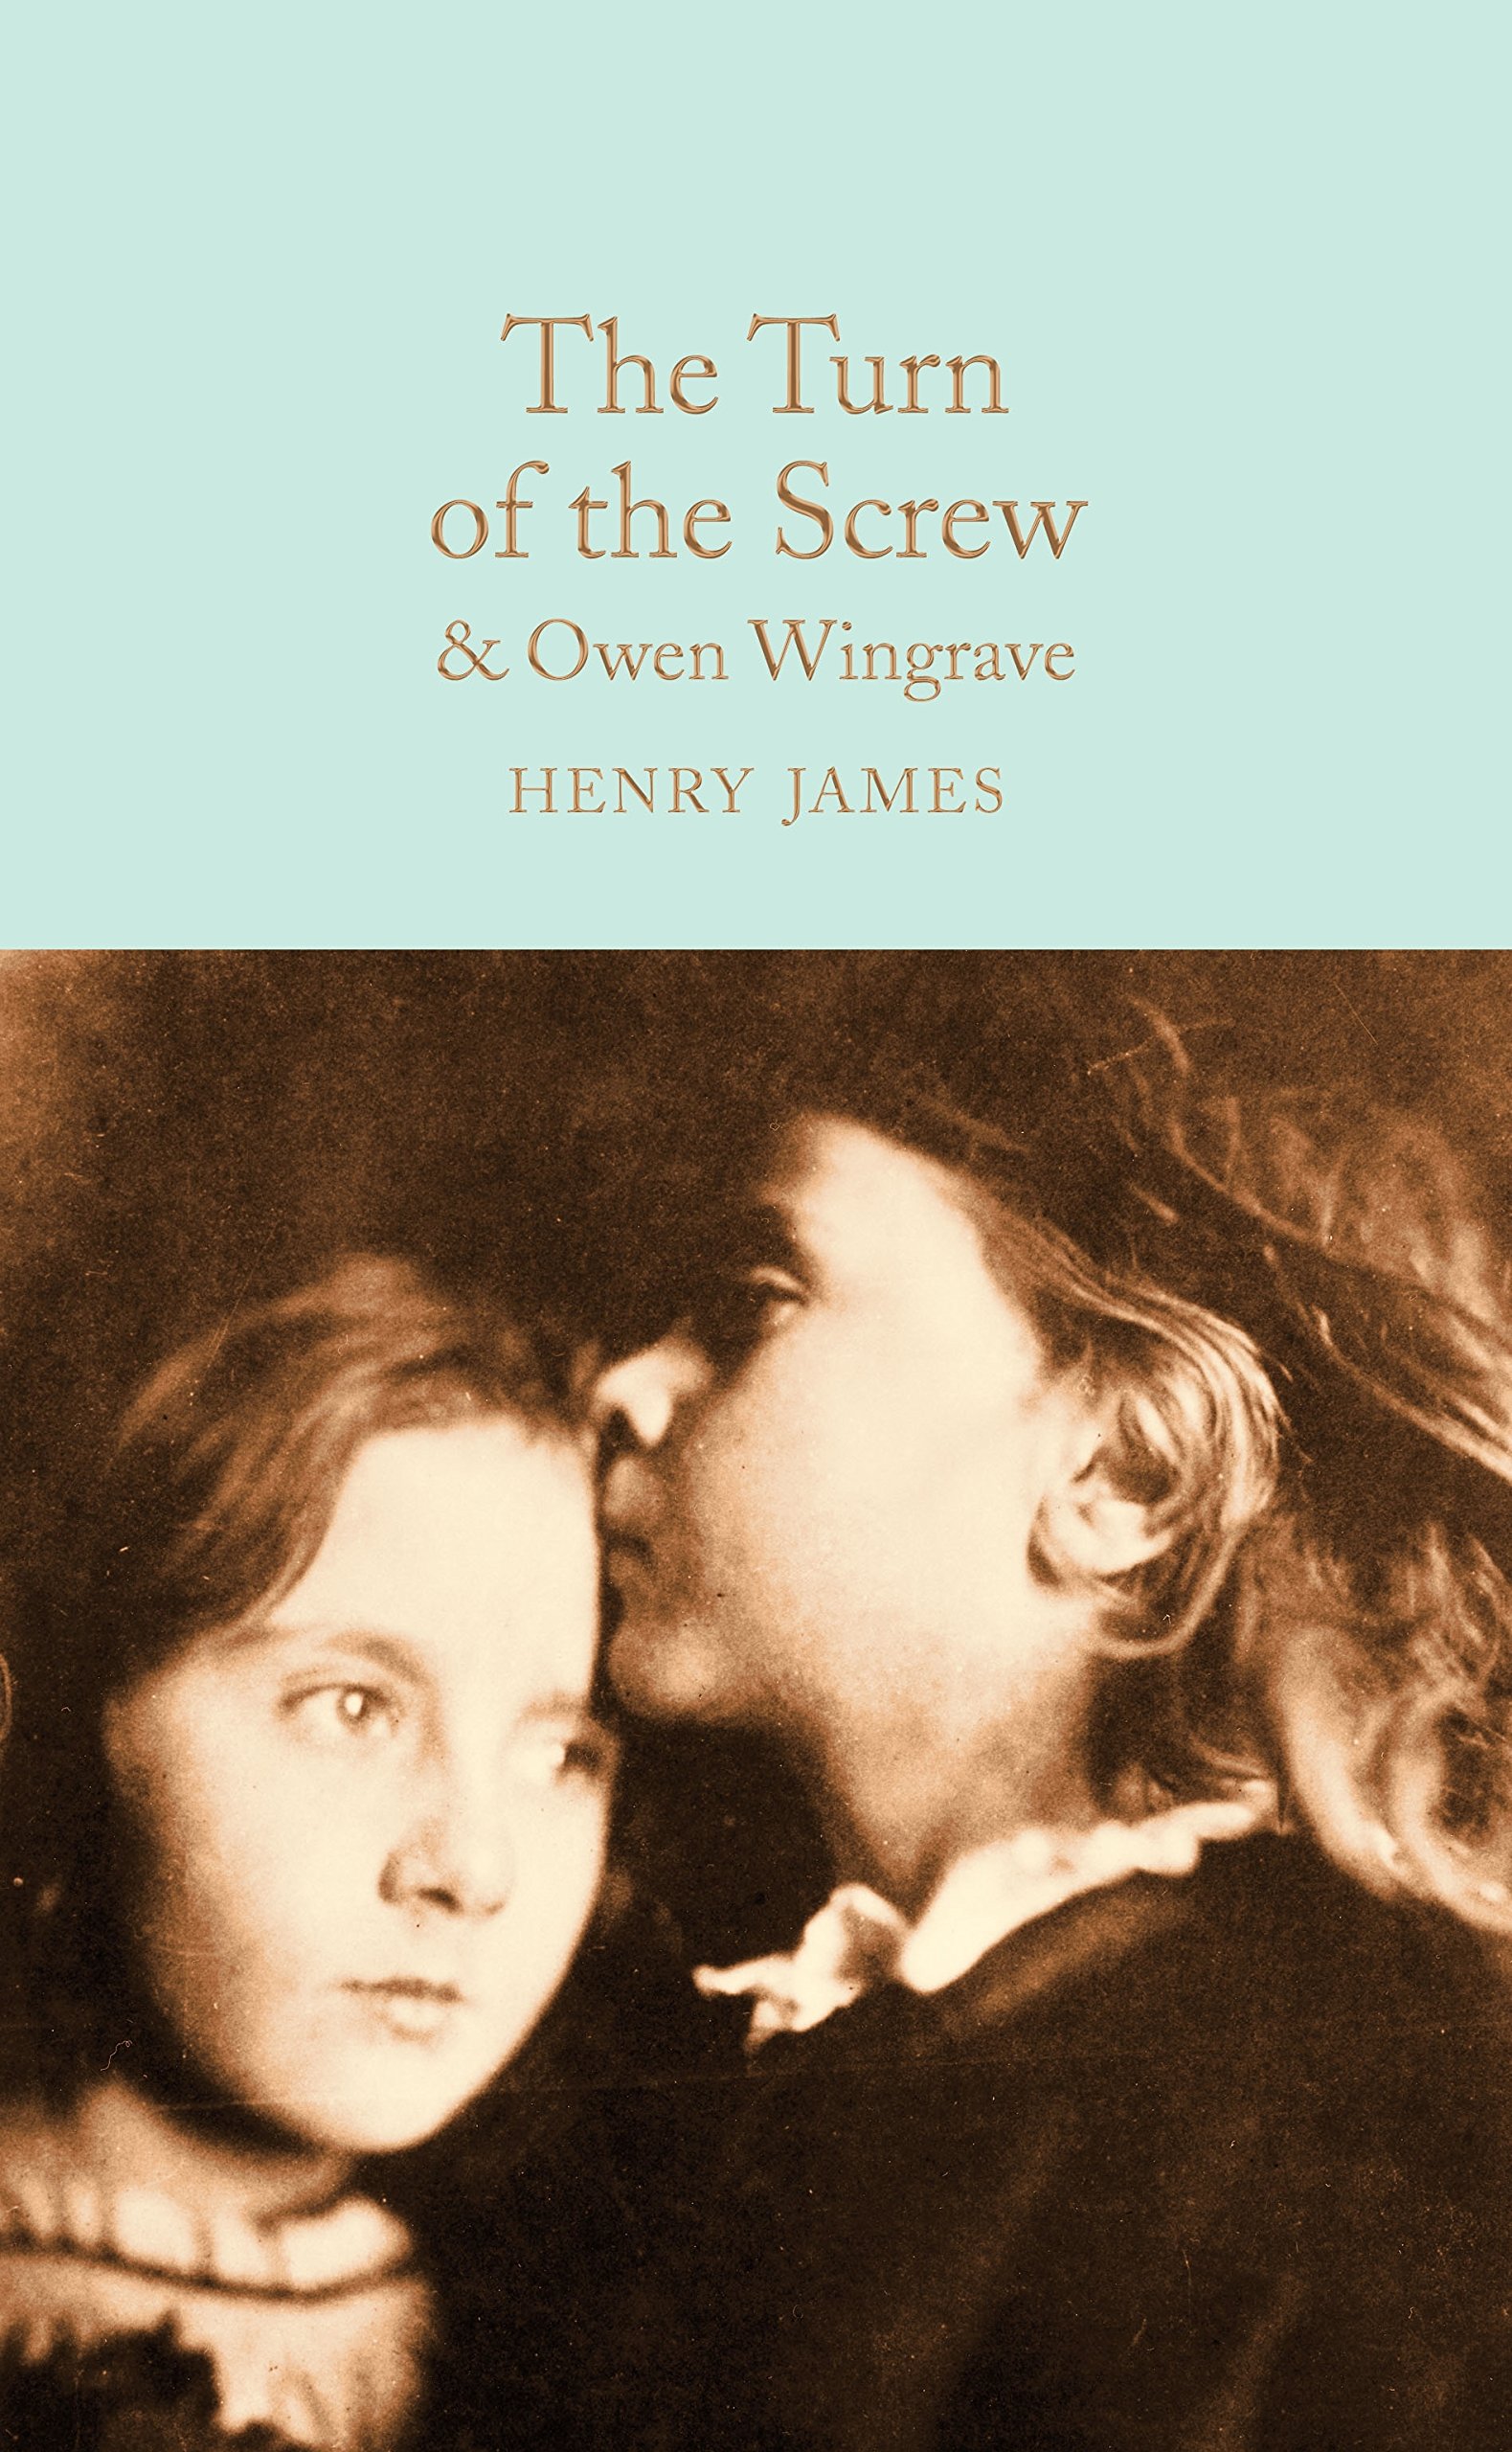 The Turn of the Screw and Owen Wingrave | Henry James image3